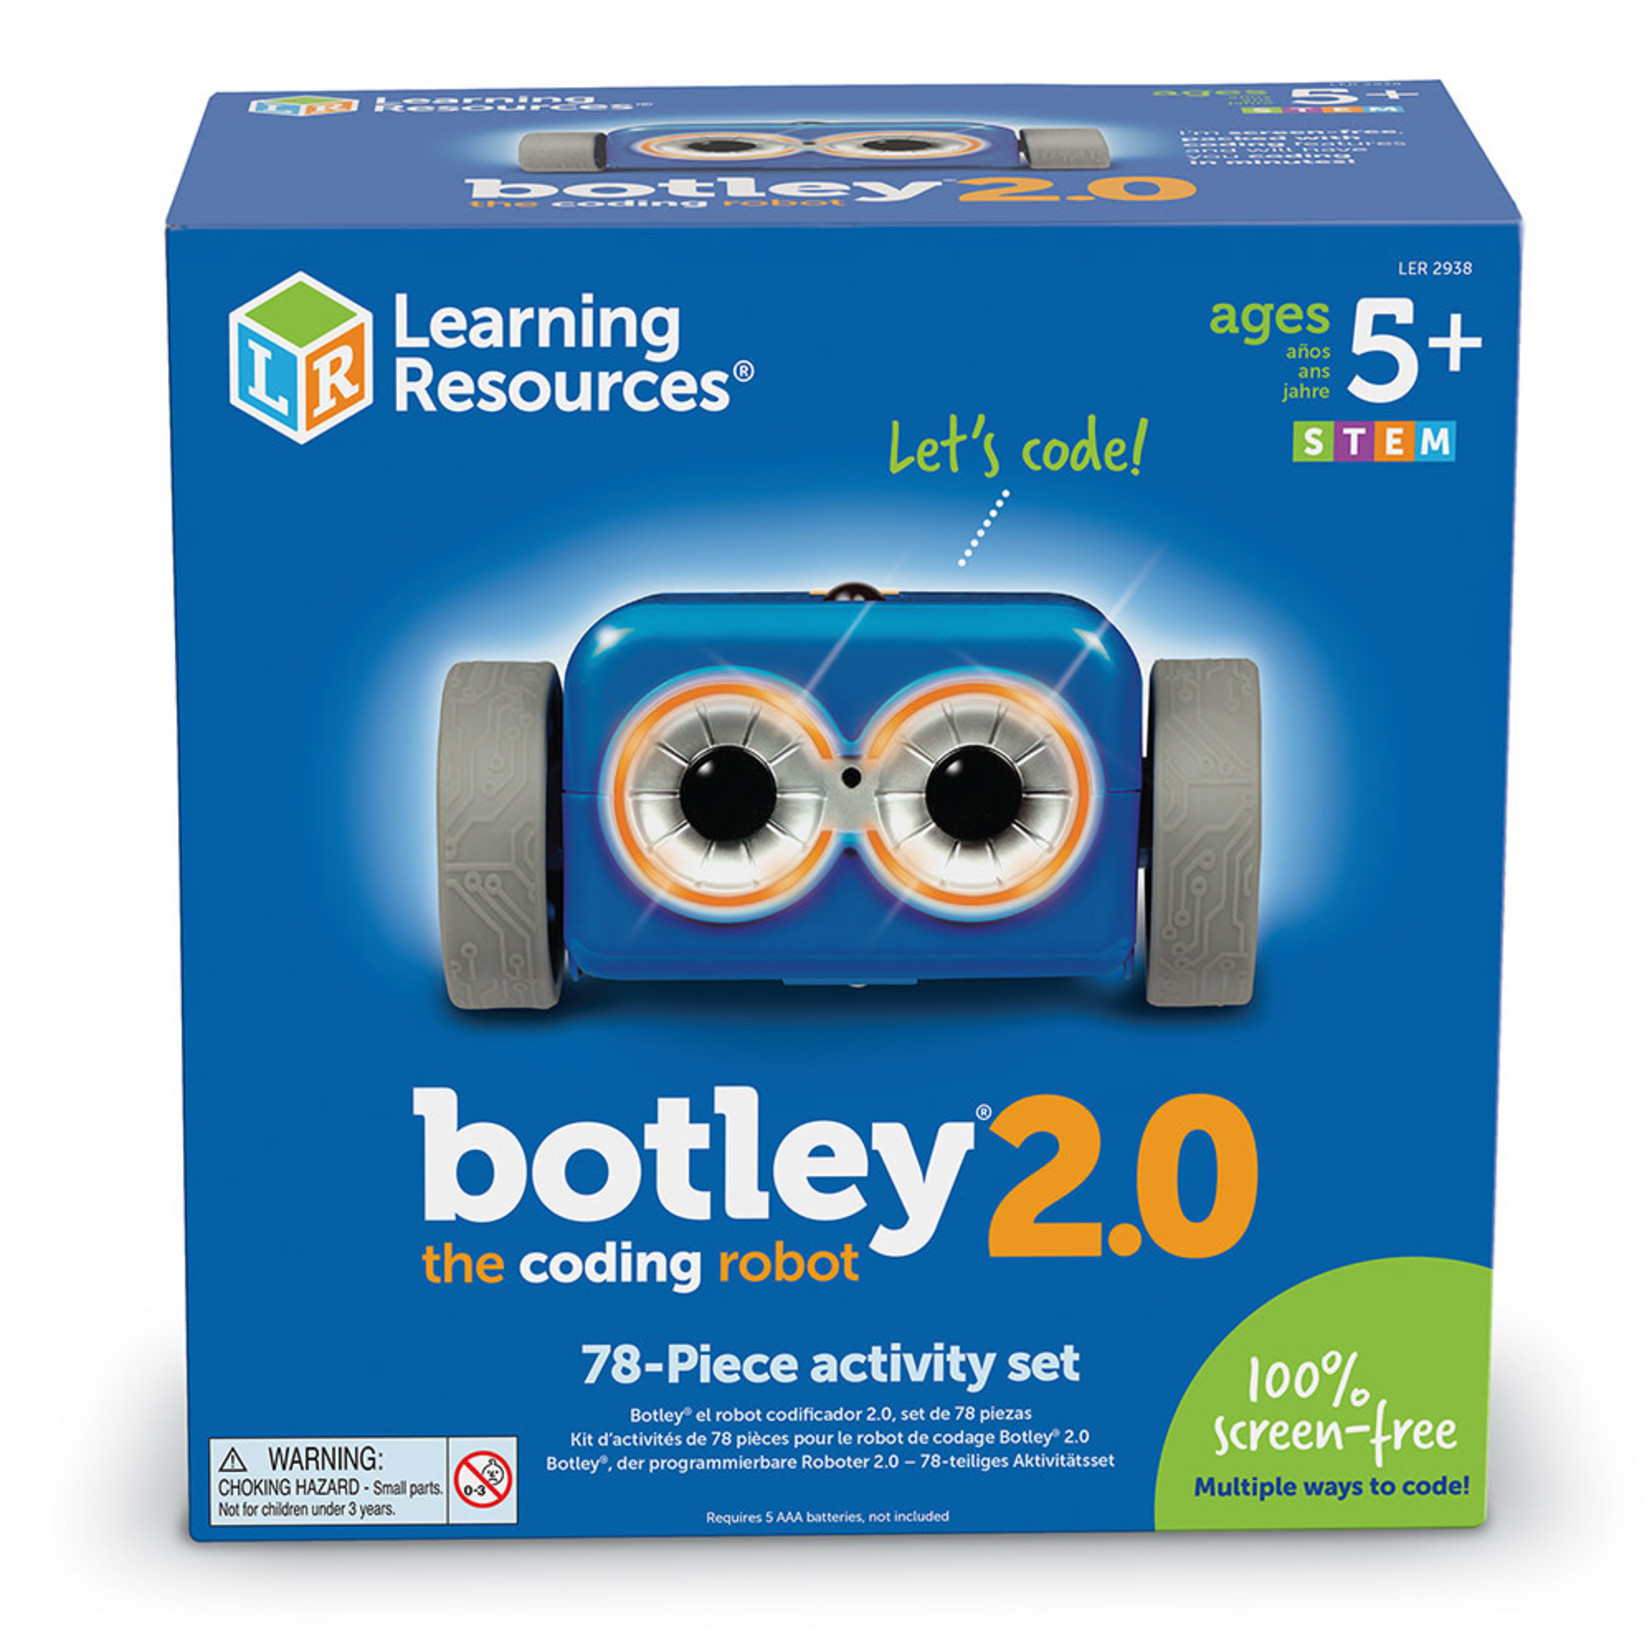 Learning Resources Botley 2.0 Coding Robot